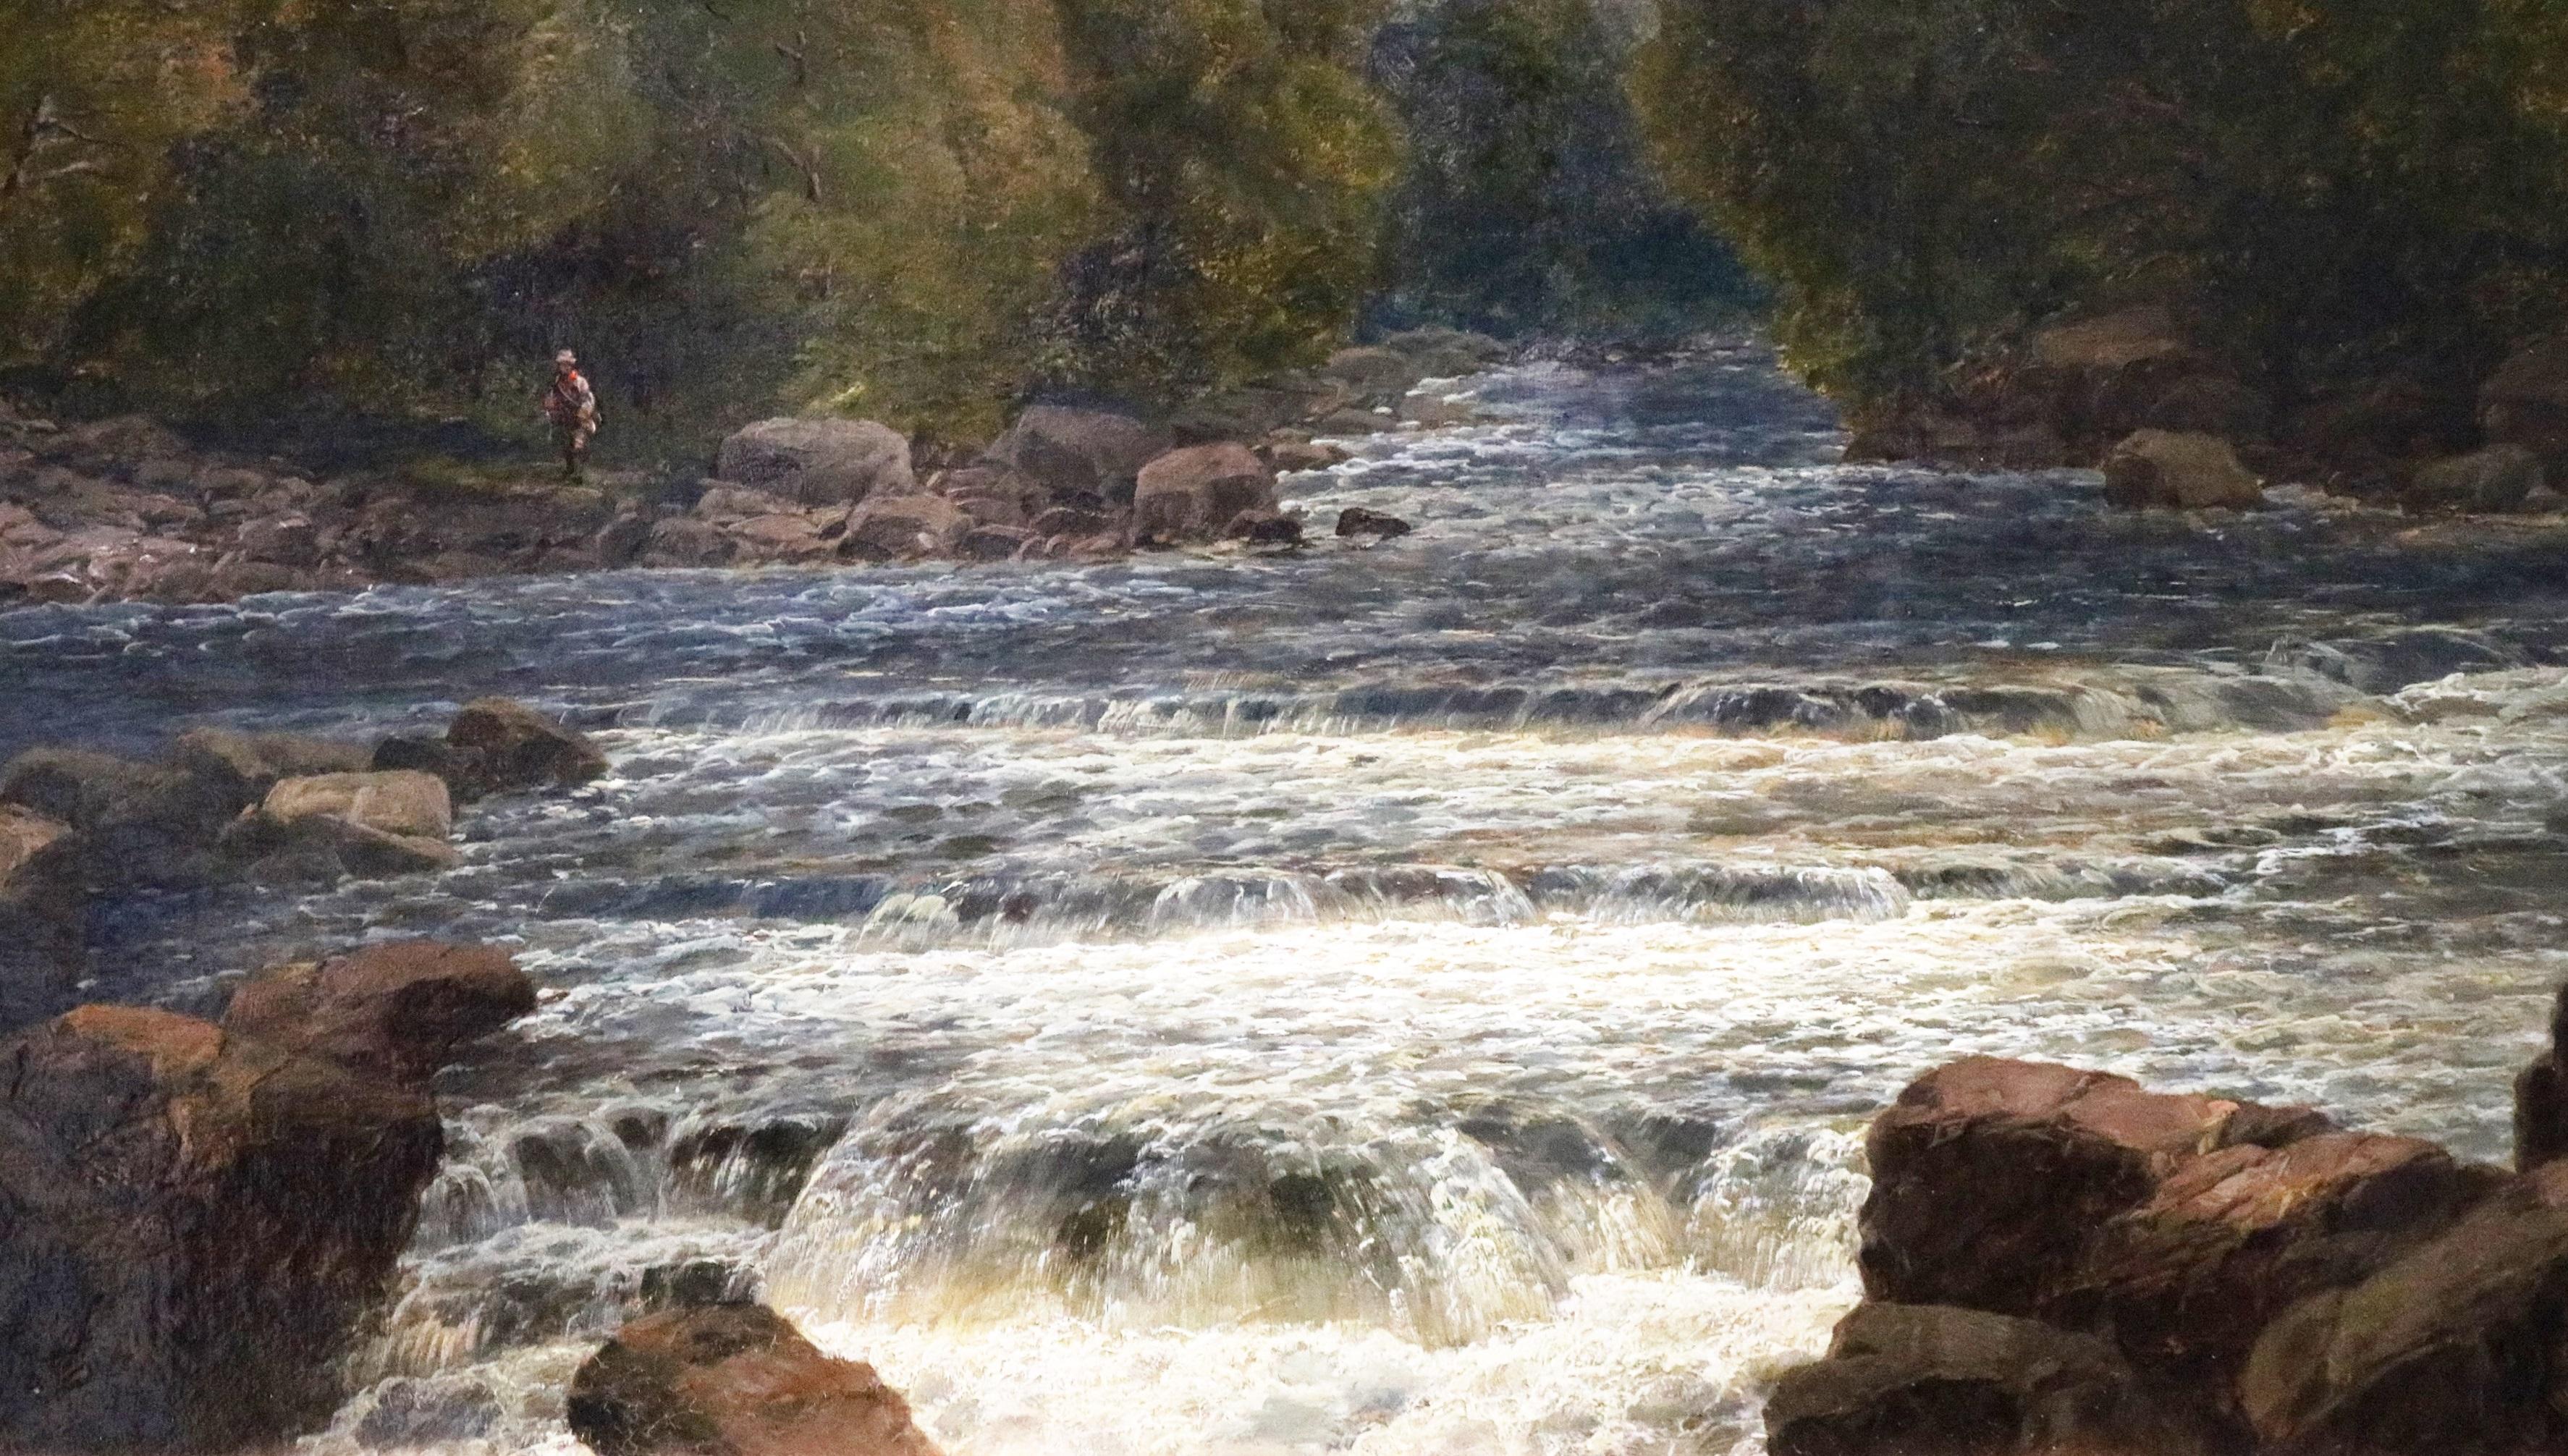 On the Dee, North Wales - 19th Century Landscape Oil Painting of Angler Fishing  2